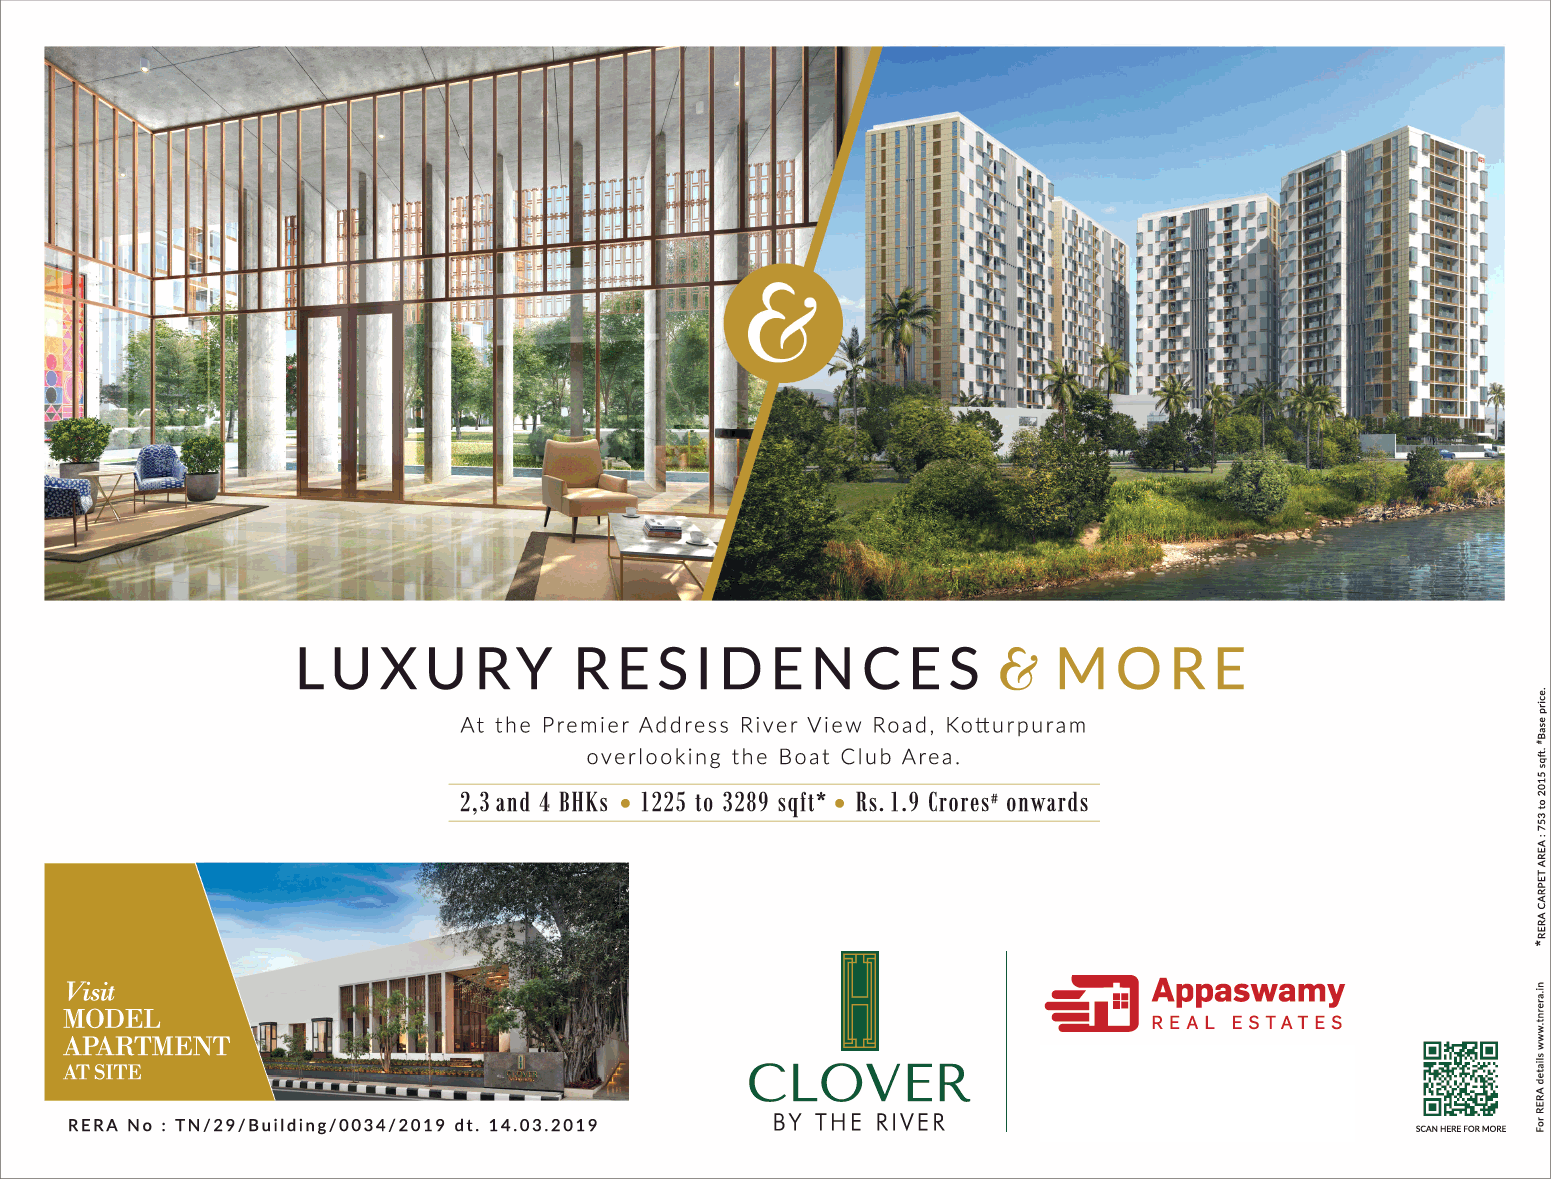 Book luxury residences & more at Appaswamy Clover By The River in Chennai Update